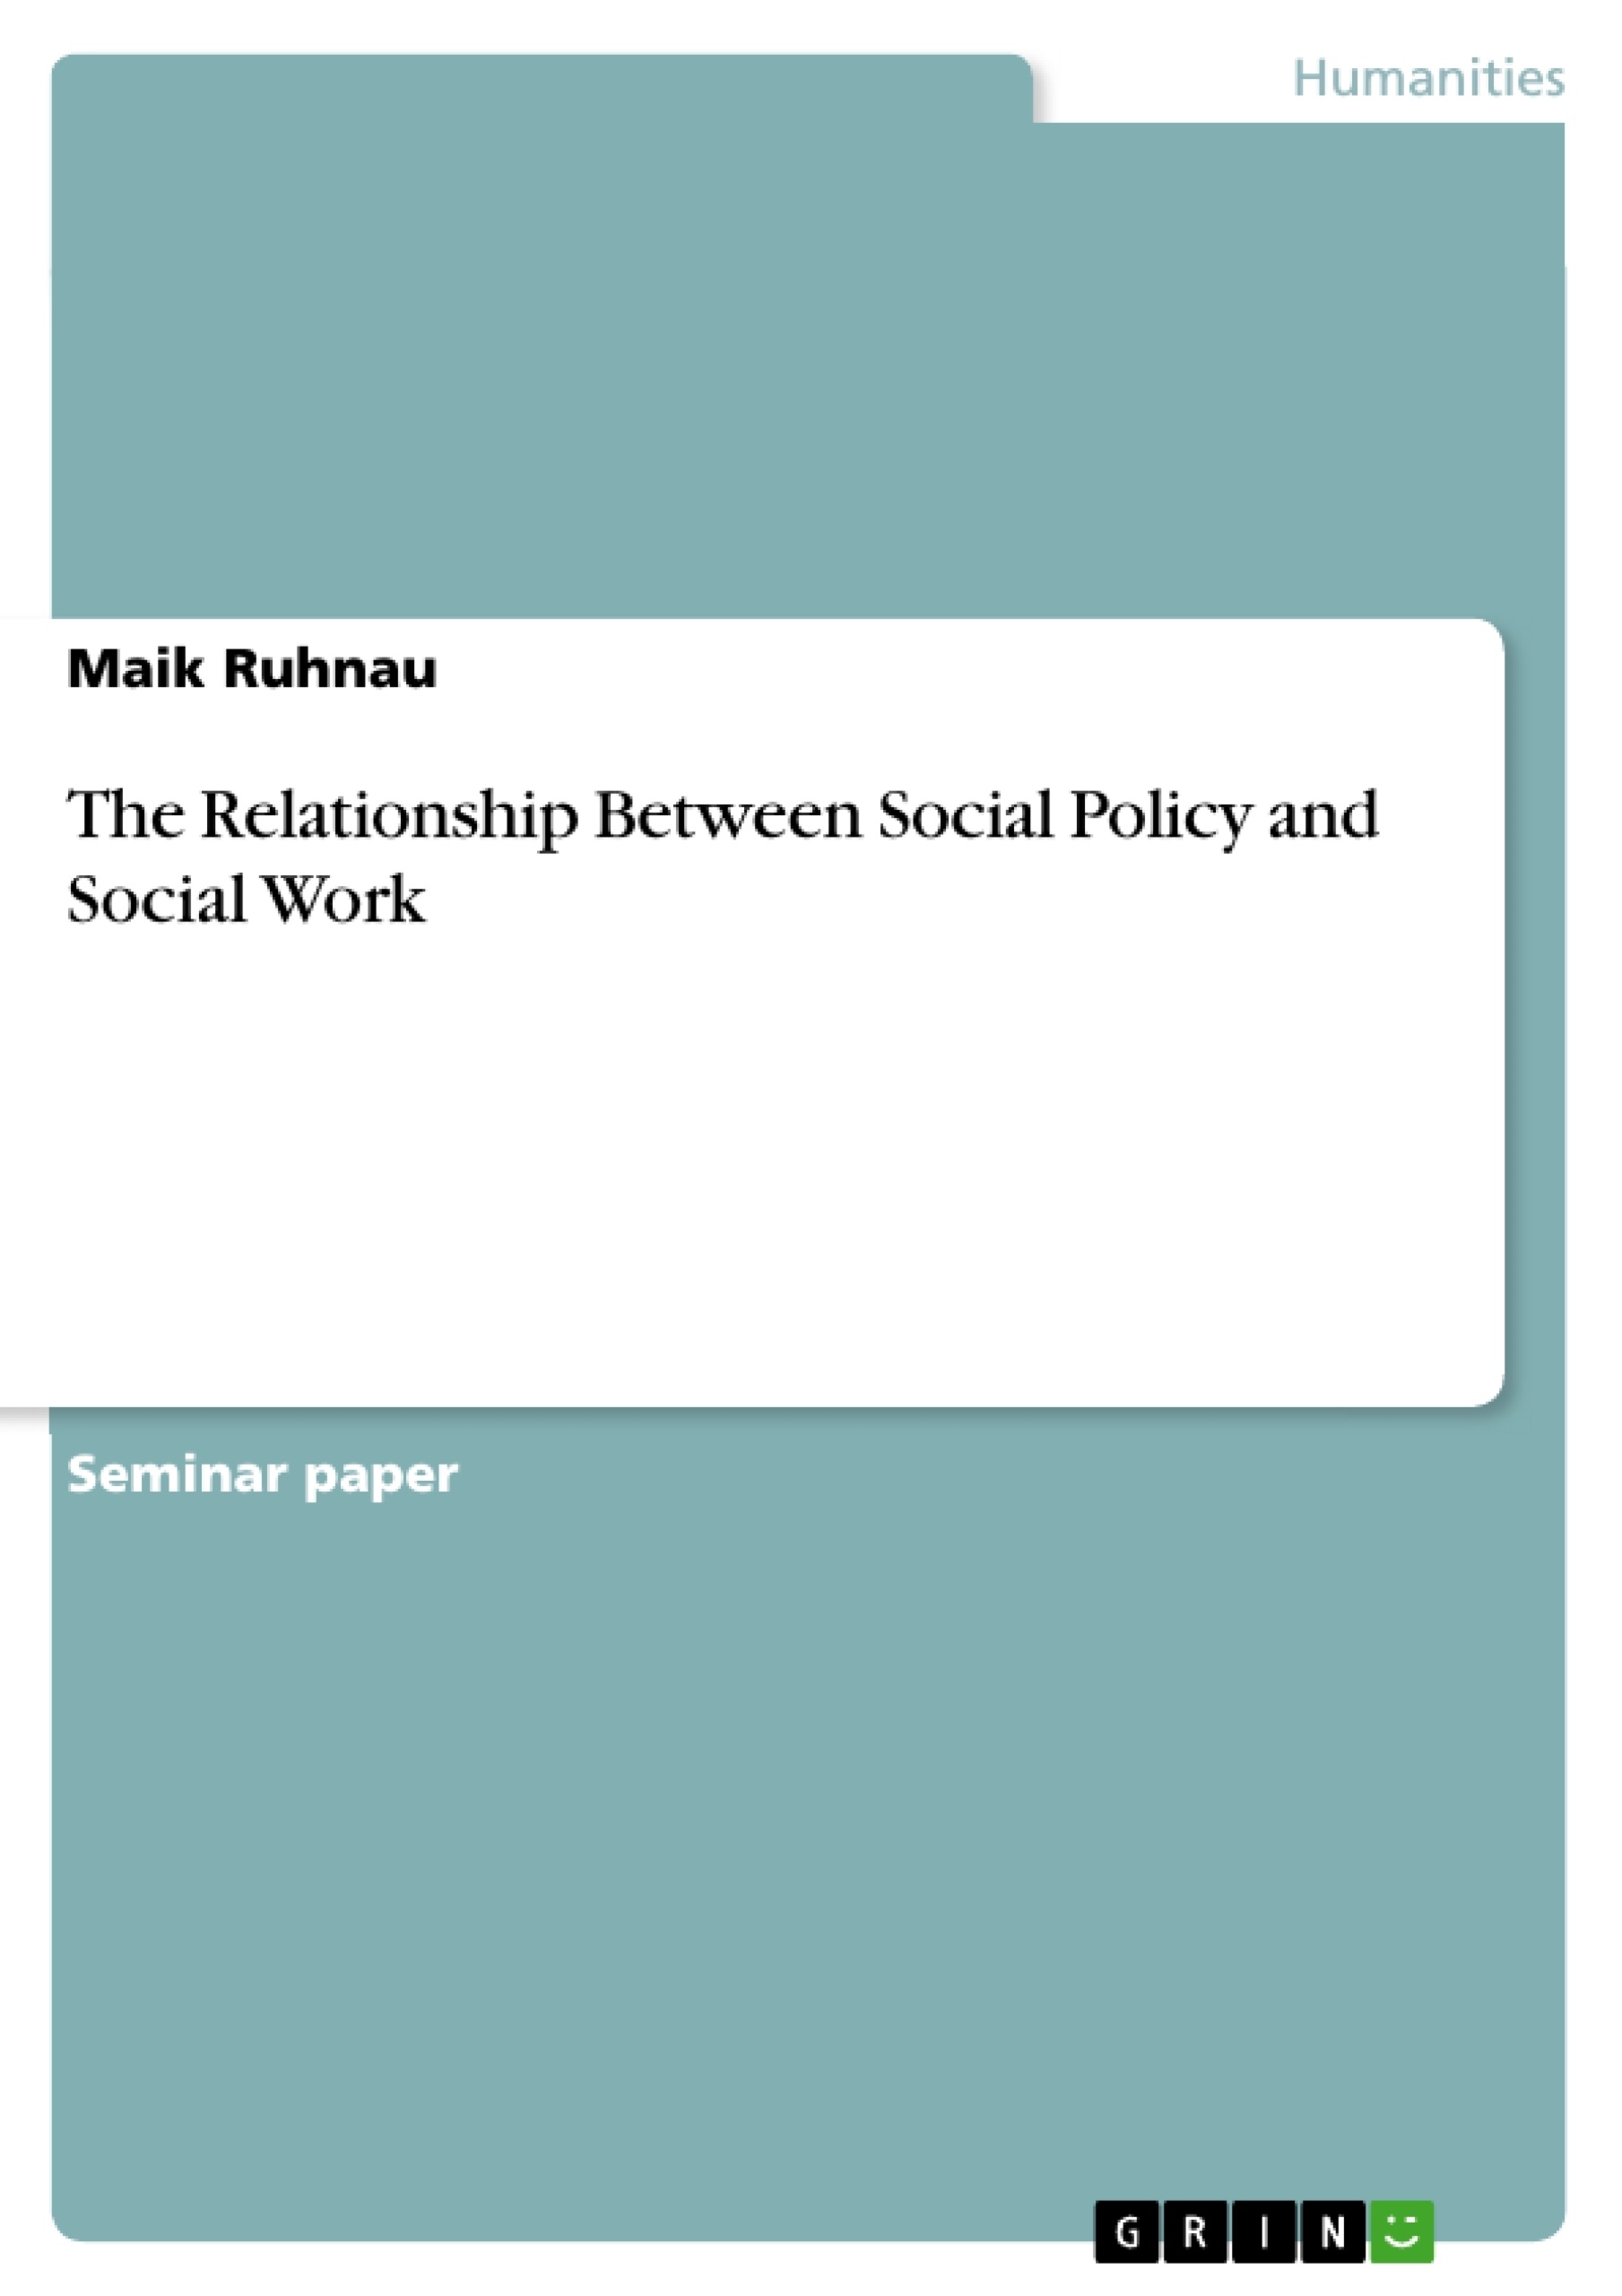 Title: The Relationship Between Social Policy and Social Work